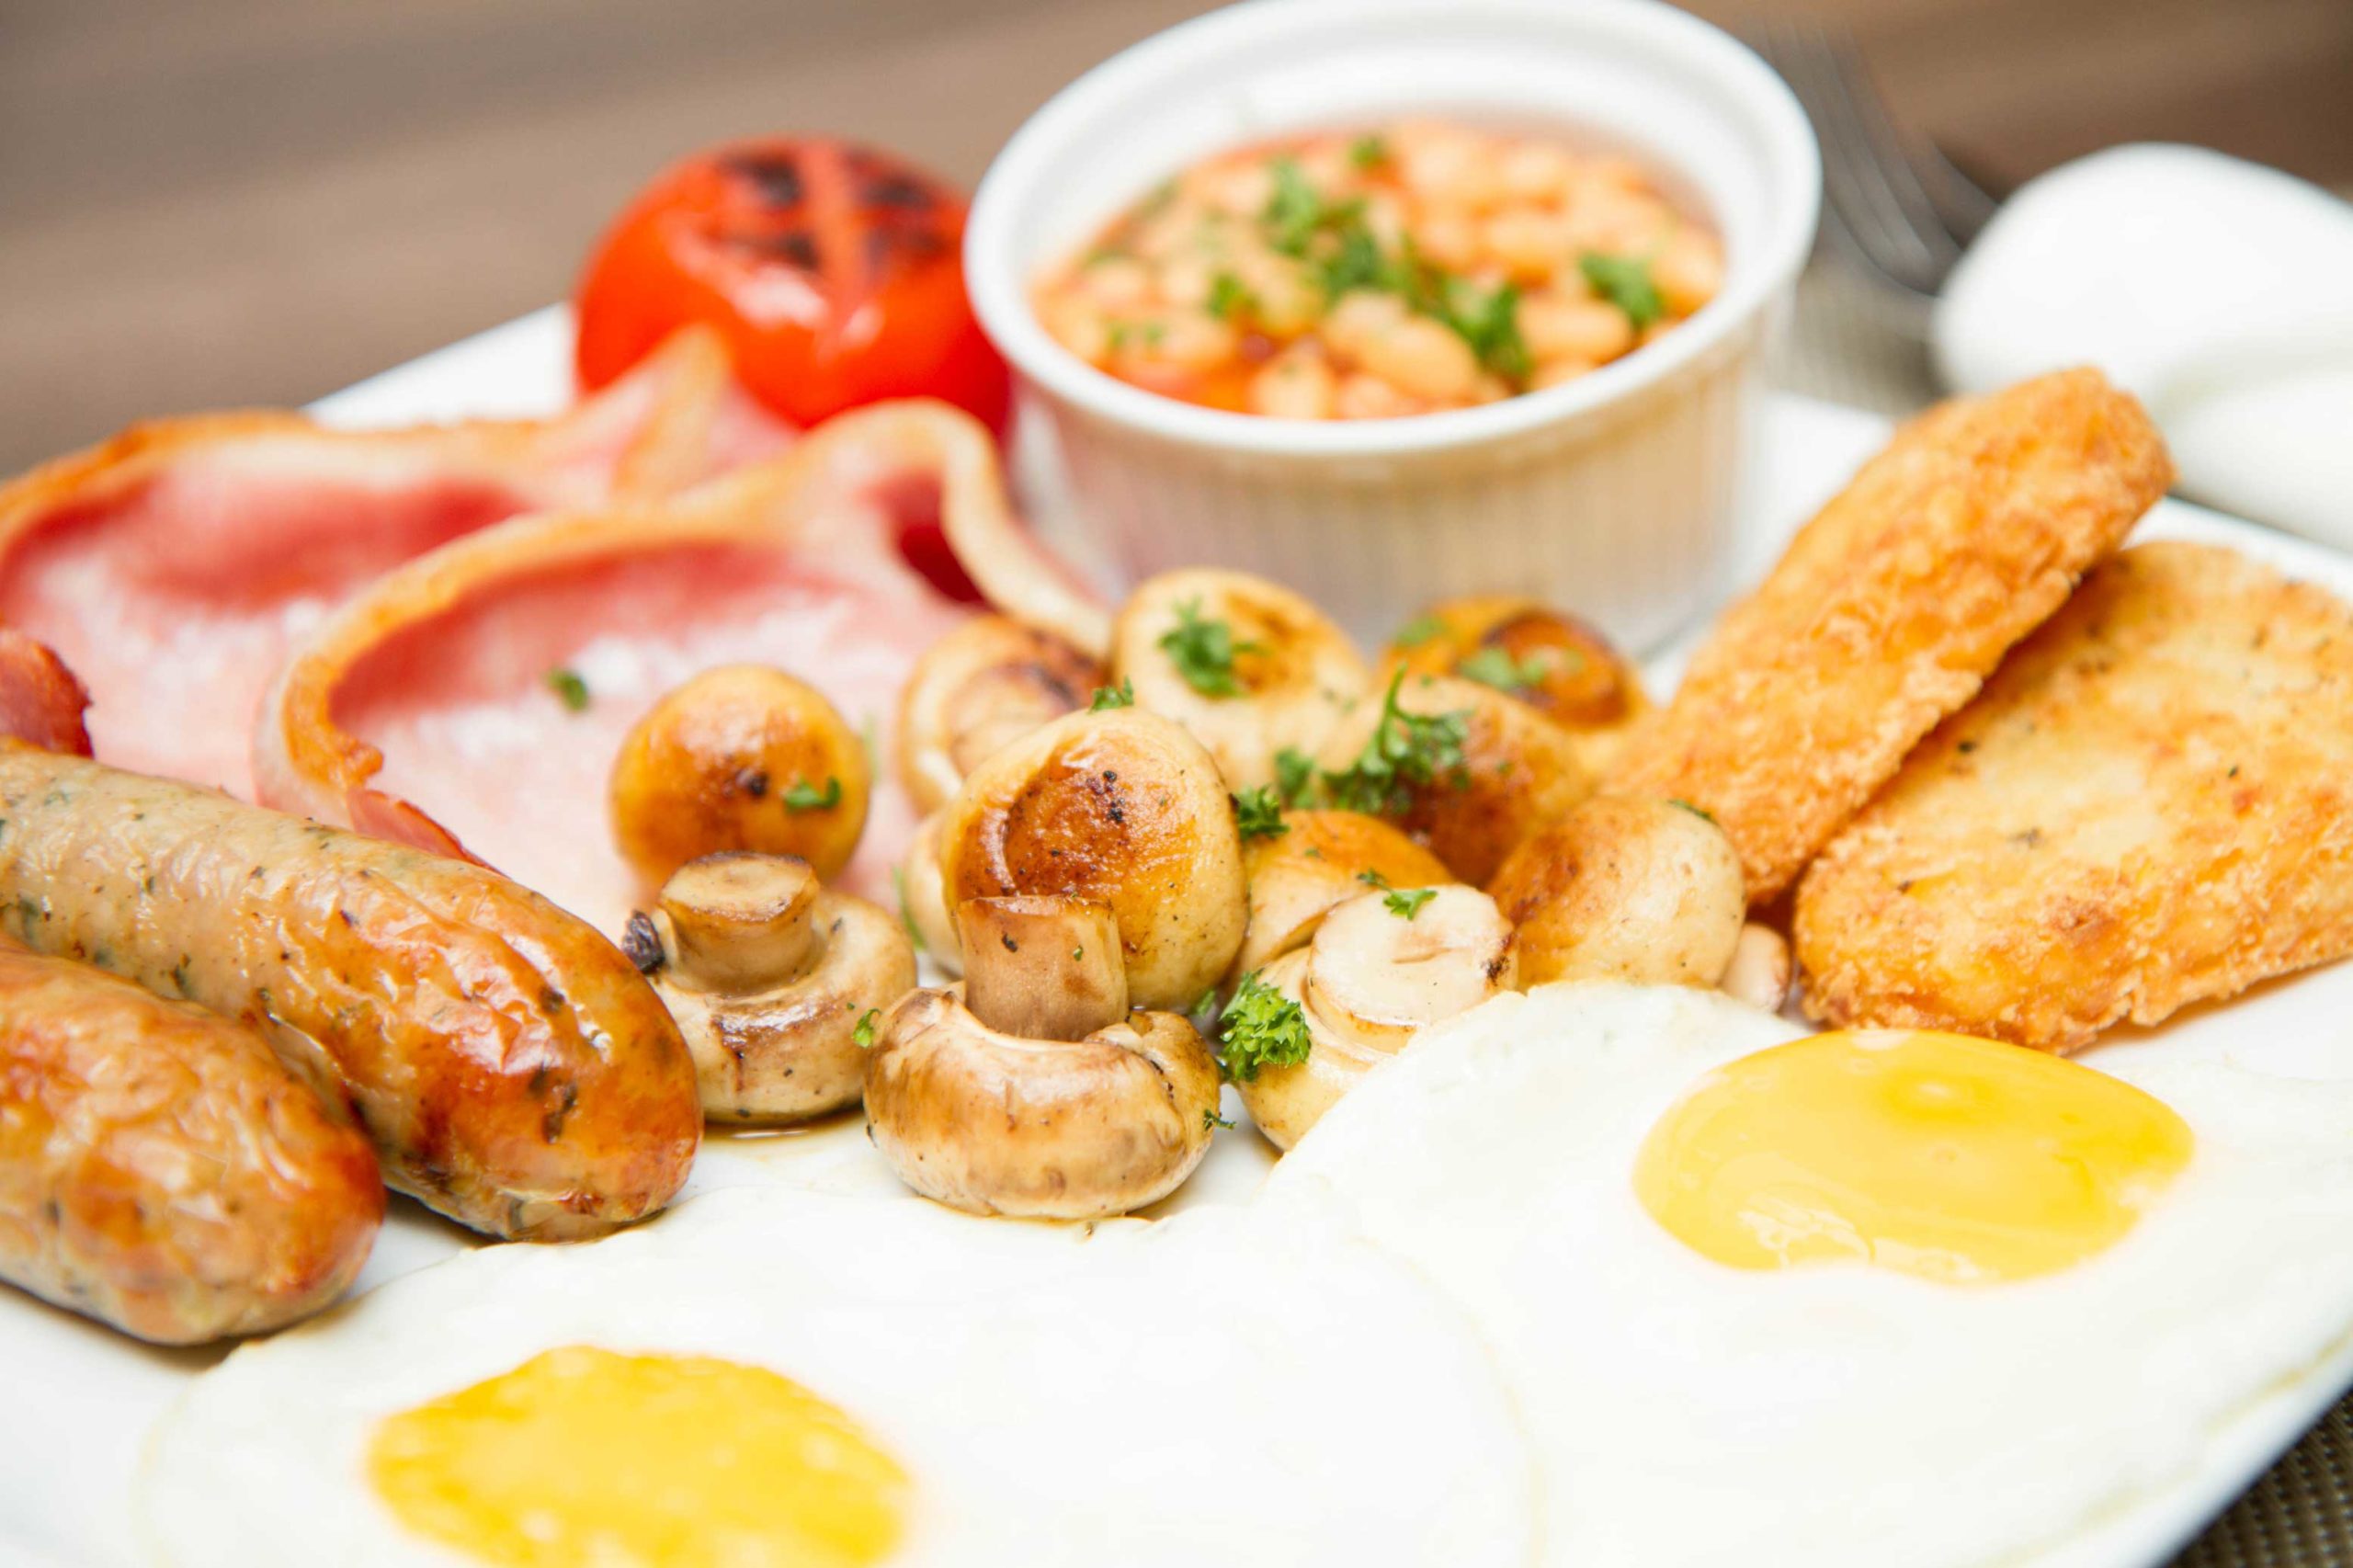 A breakfast plate with a full english breakfast